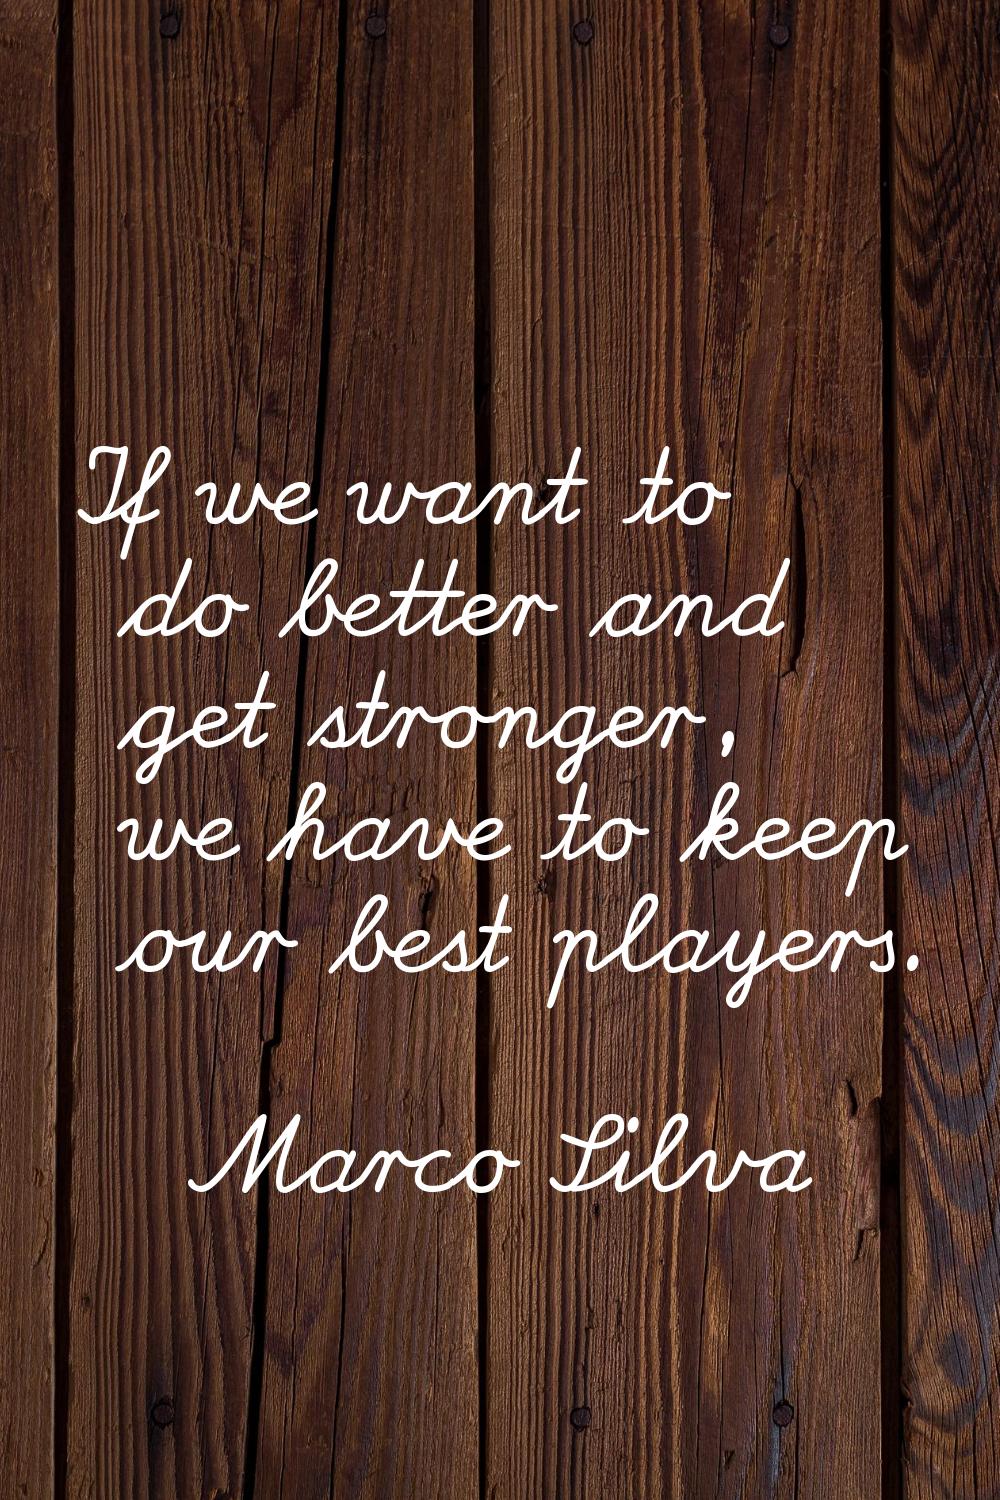 If we want to do better and get stronger, we have to keep our best players.